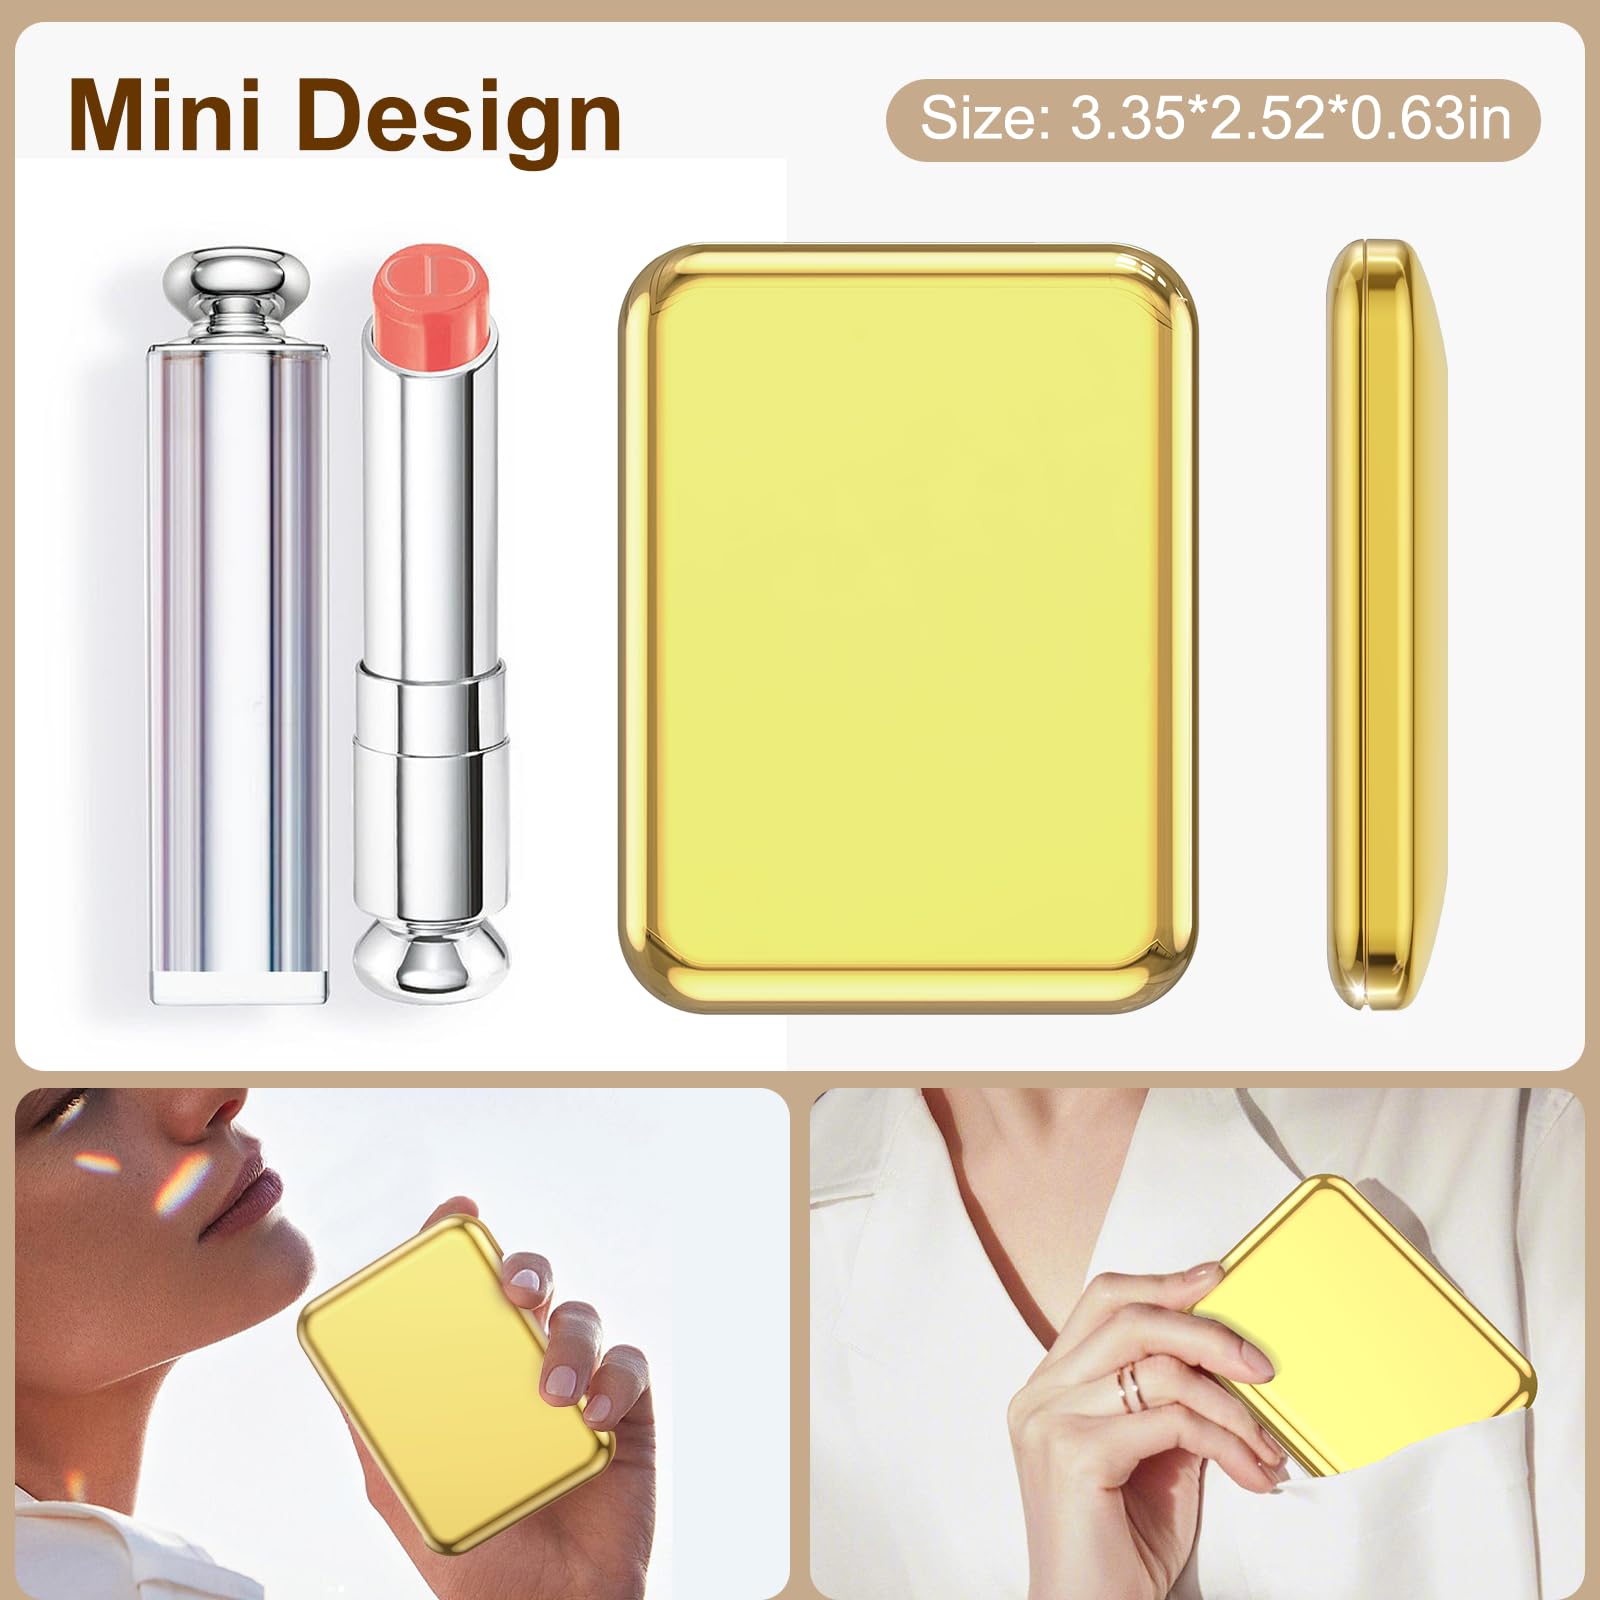 Magnifying Compact Mirror for Purses - Benbilry Double Sided